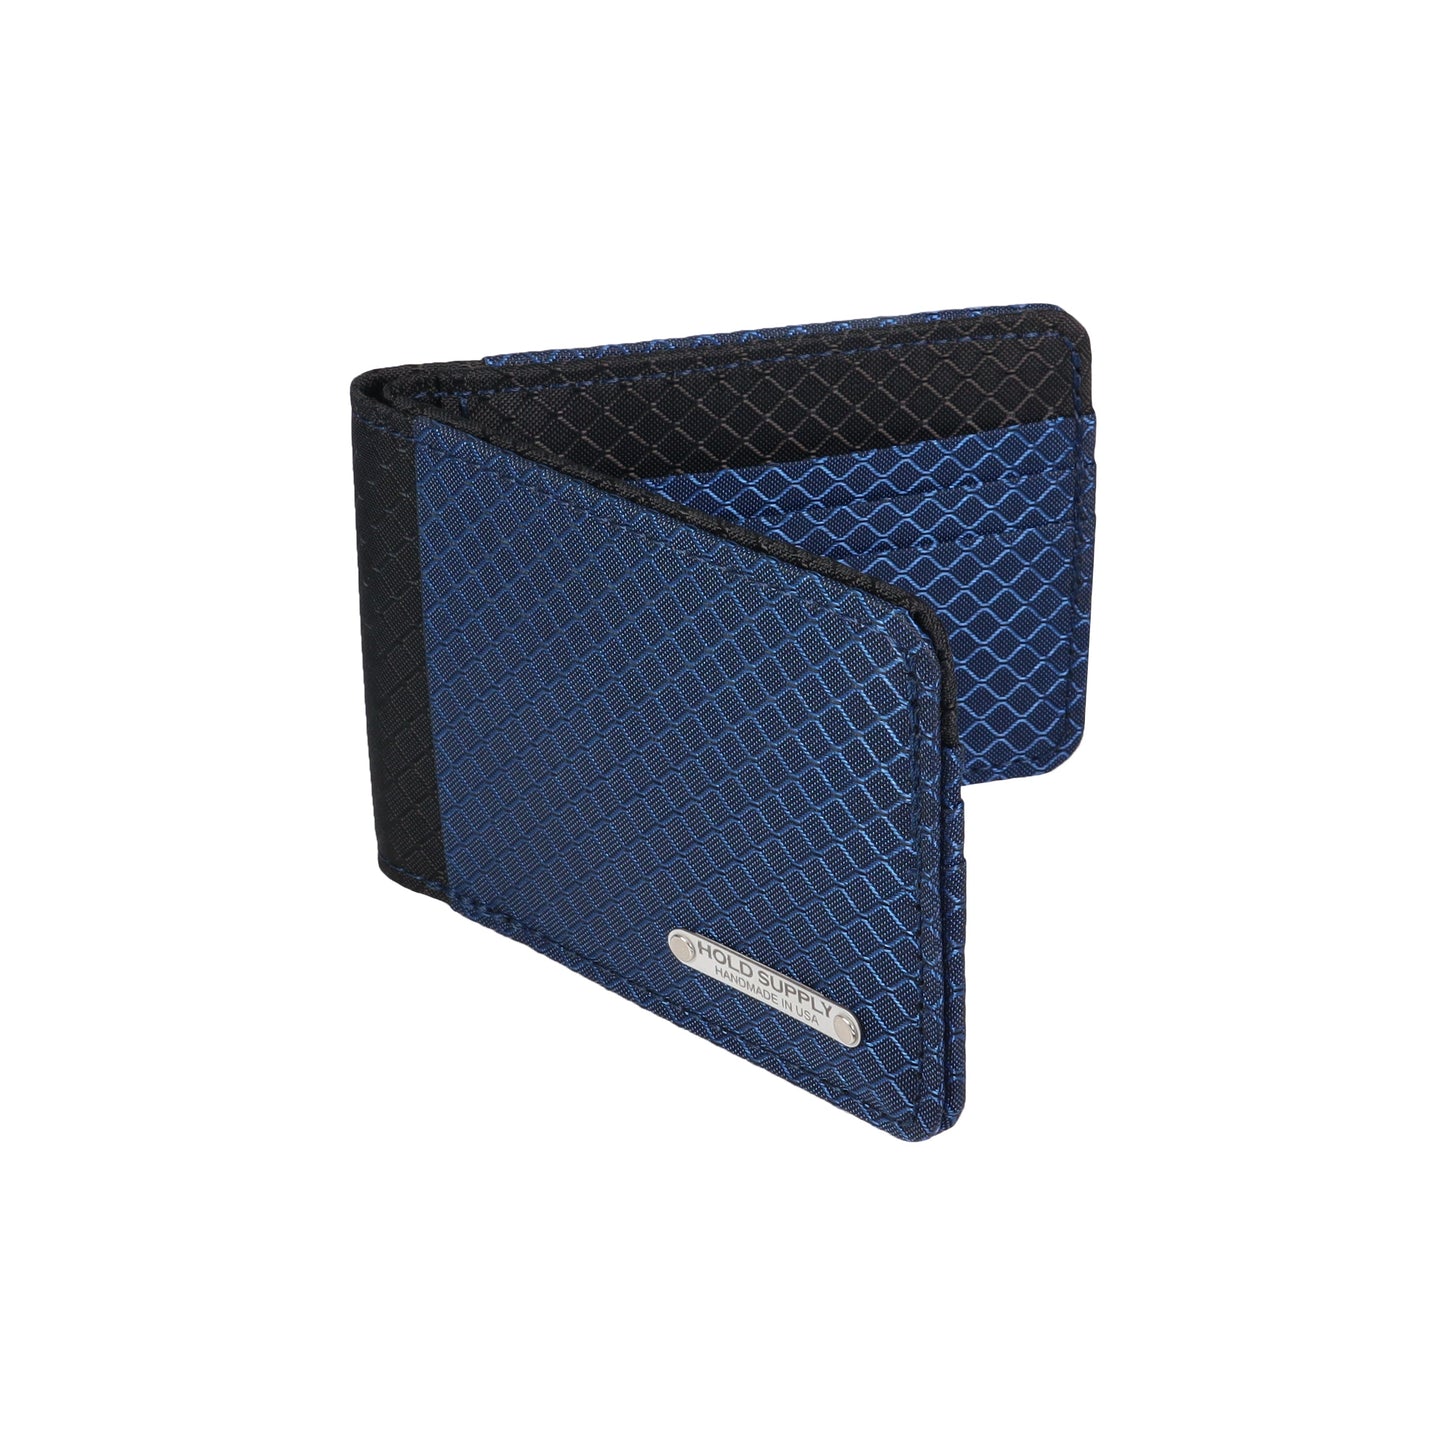 Navy Blue and Black Ripstop Fabric Wallet